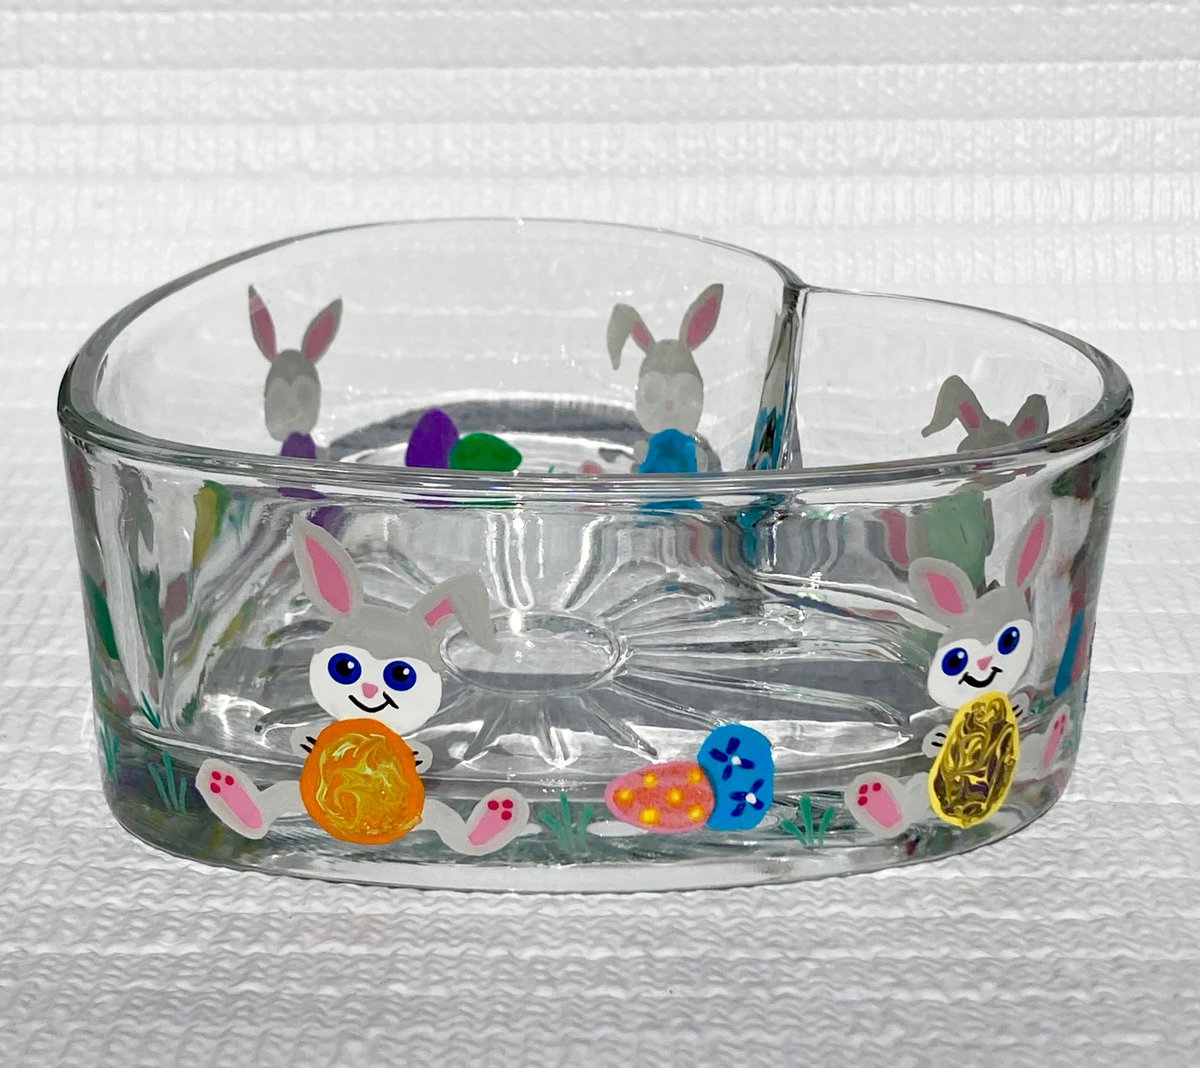 Easter bunny candy dish etsy.com/listing/117605… #easterbunny #candydish #heartbowl #TMTinsta #easterdecoration #eastergift #eastercandydish